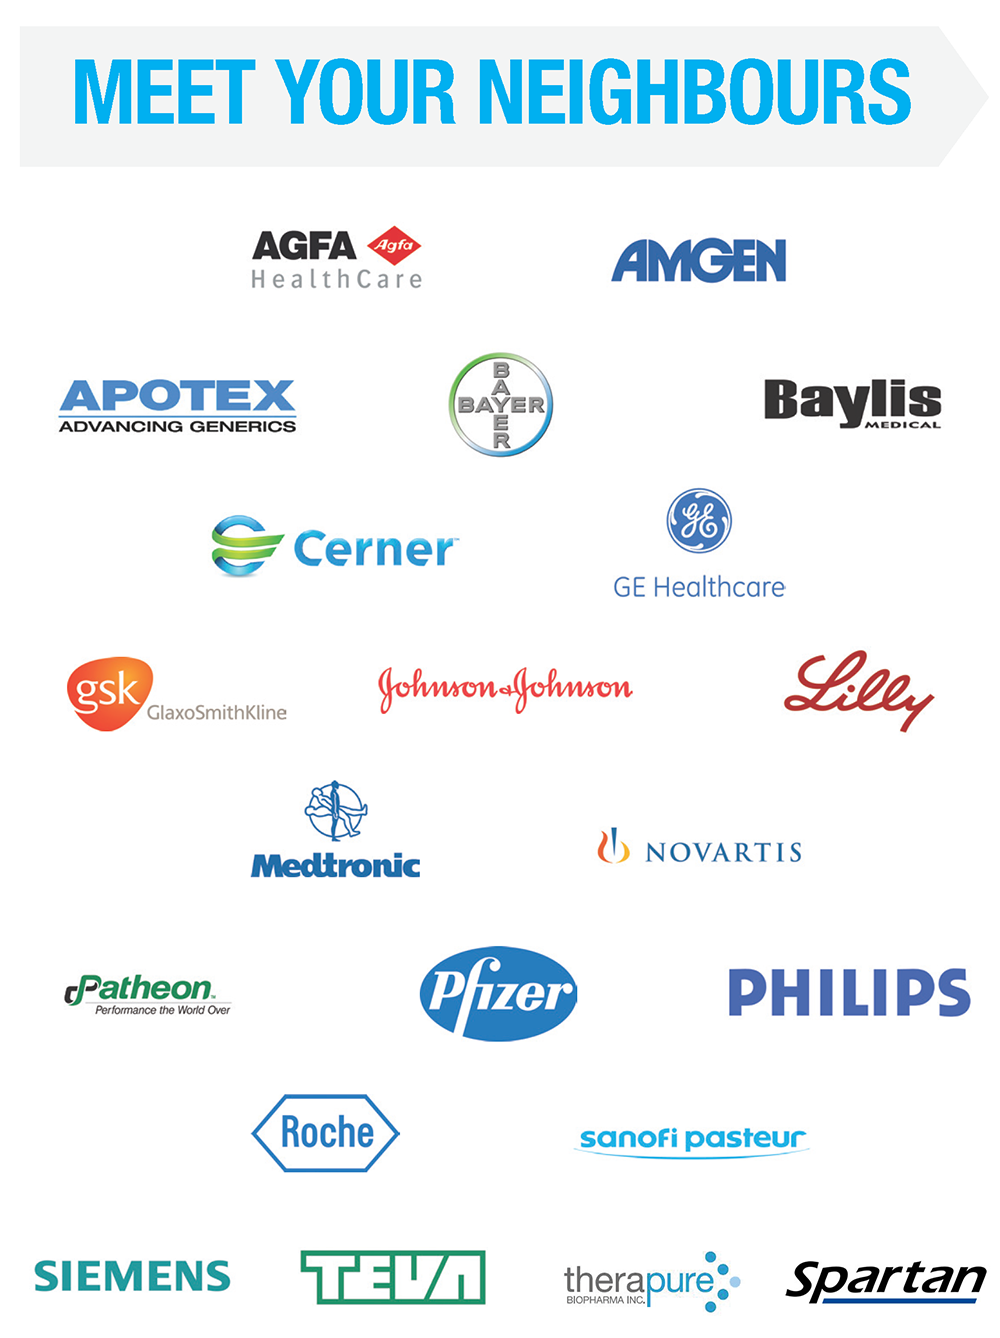 A collage of logos representing life sciences companies with a presence in Ontario.